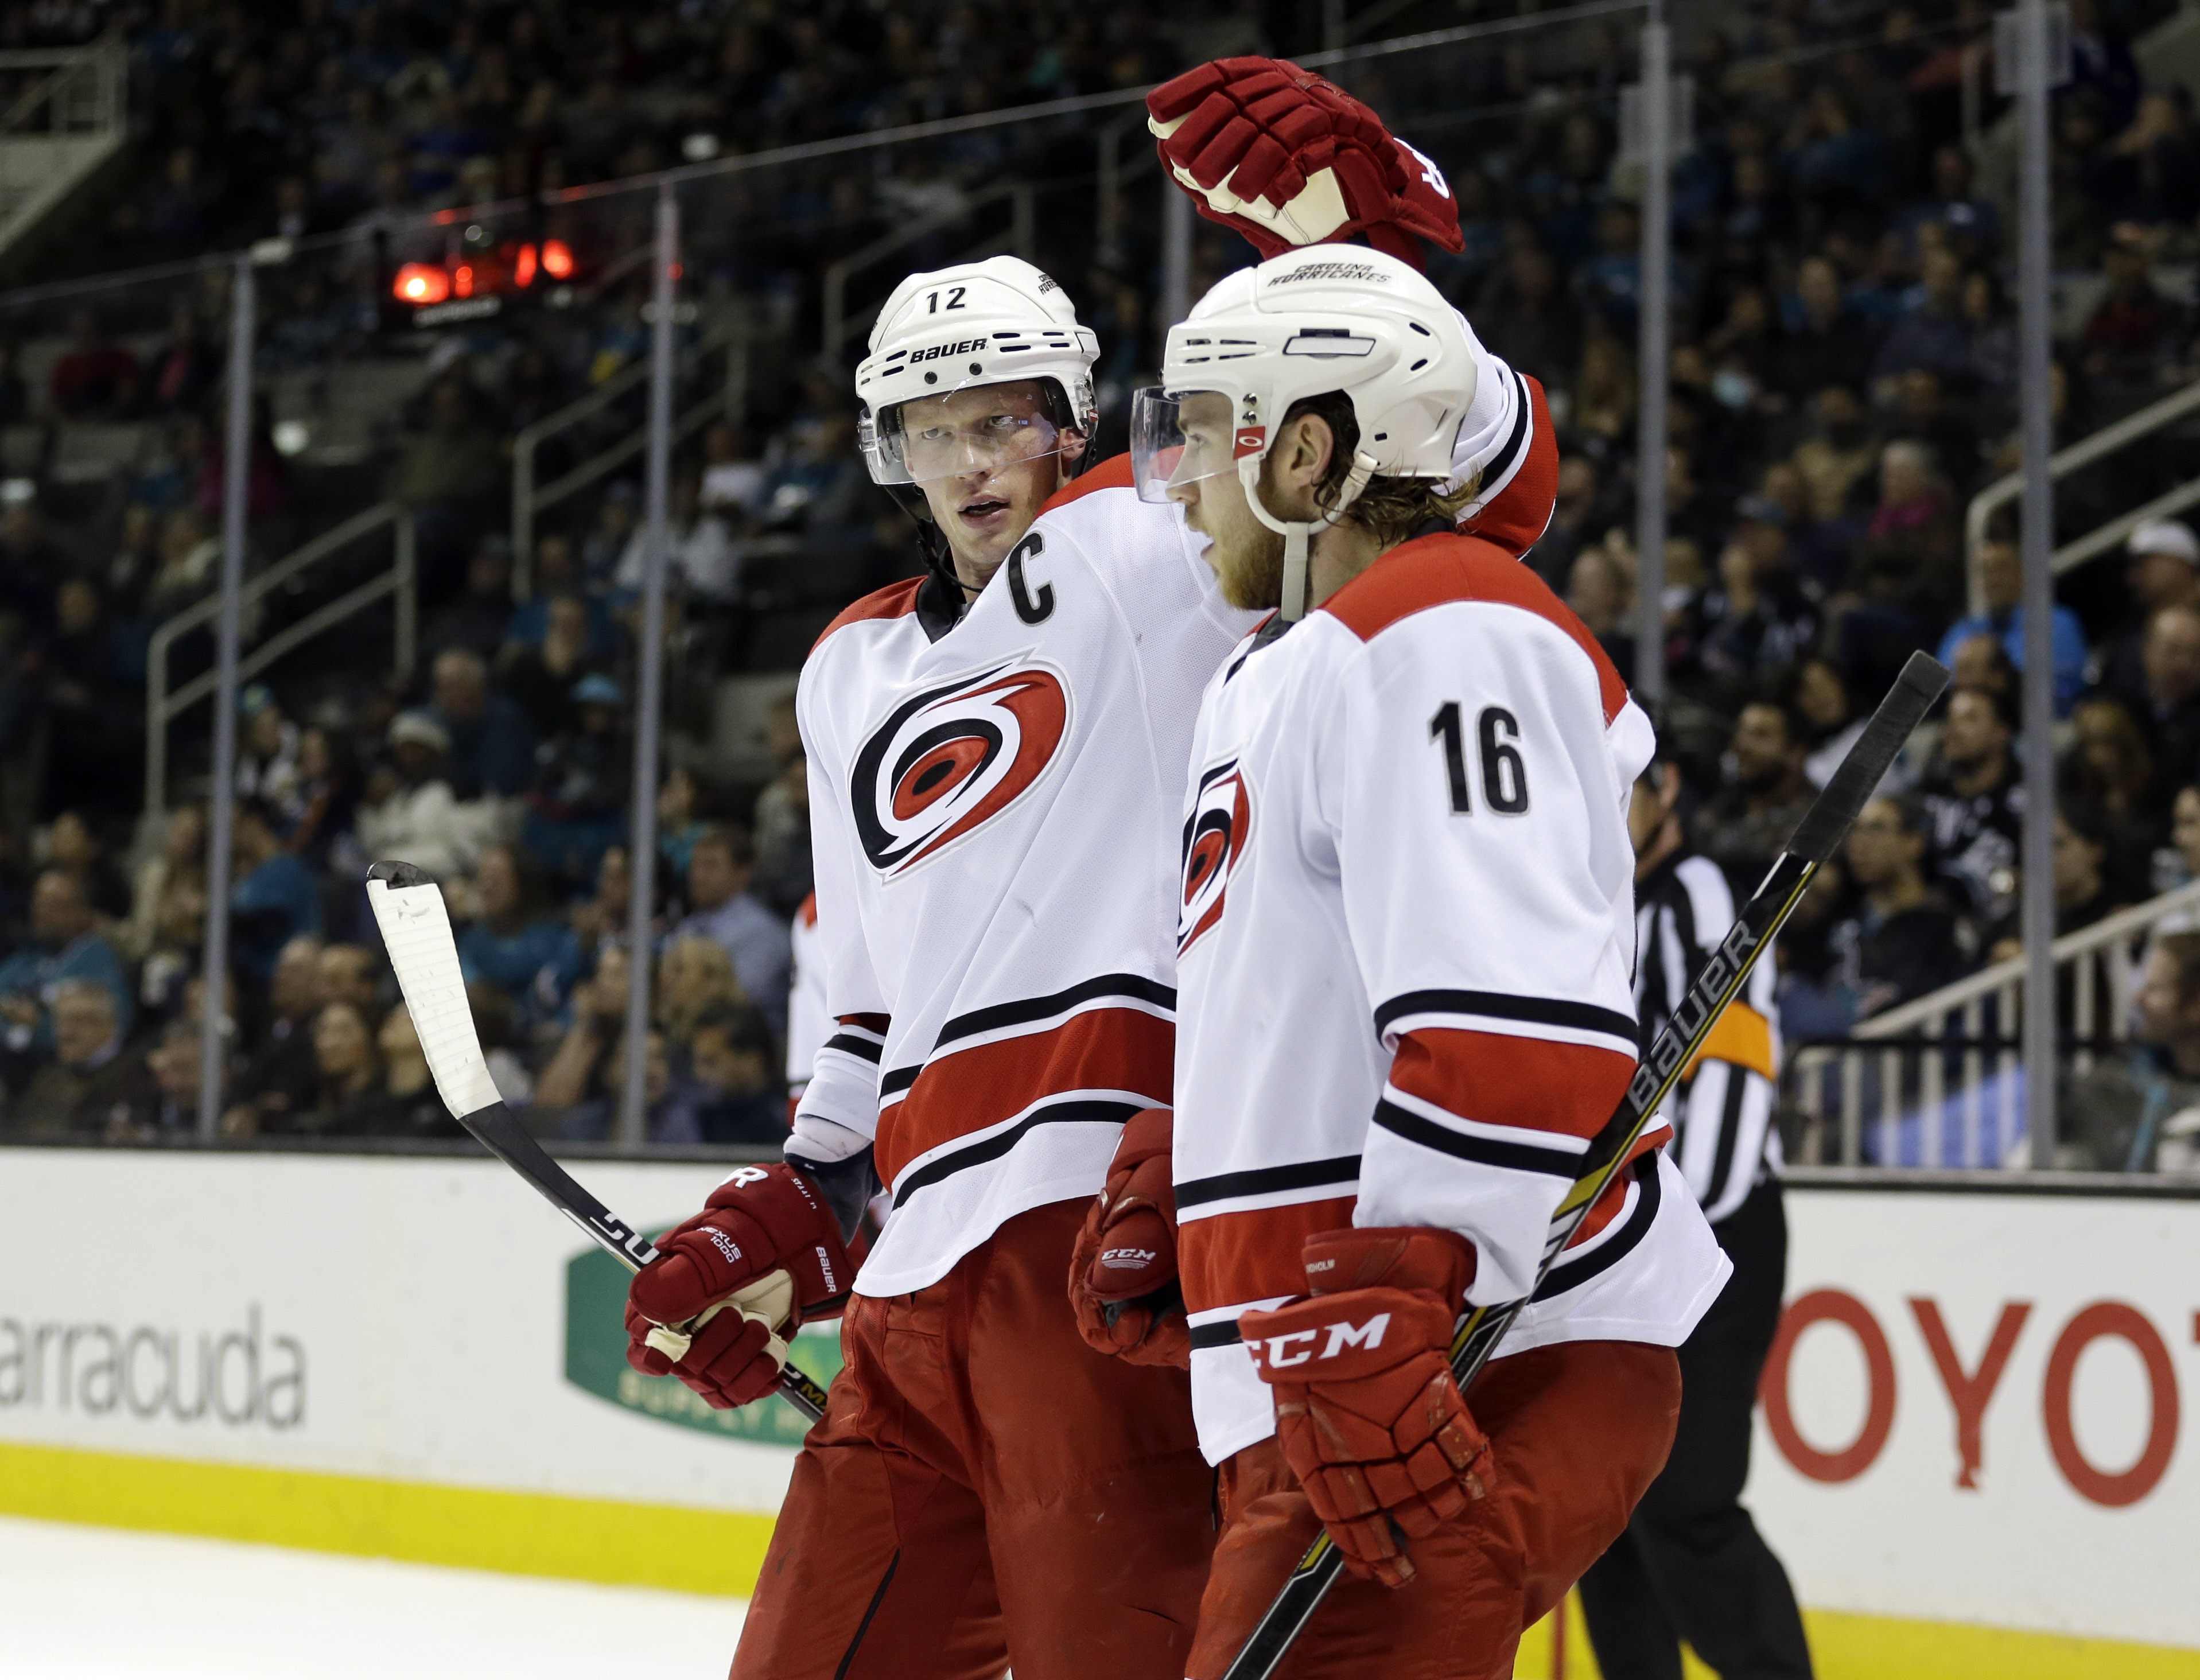 Carolina Hurricanes' Elias Lindholm (16) celebrates his goal with teammate Eric Staal during the second period of an NHL hockey game against the San Jose Sharks on Saturday, Feb. 7, 2015, in San Jose, Calif. (AP Photo/Marcio Jose Sanchez)